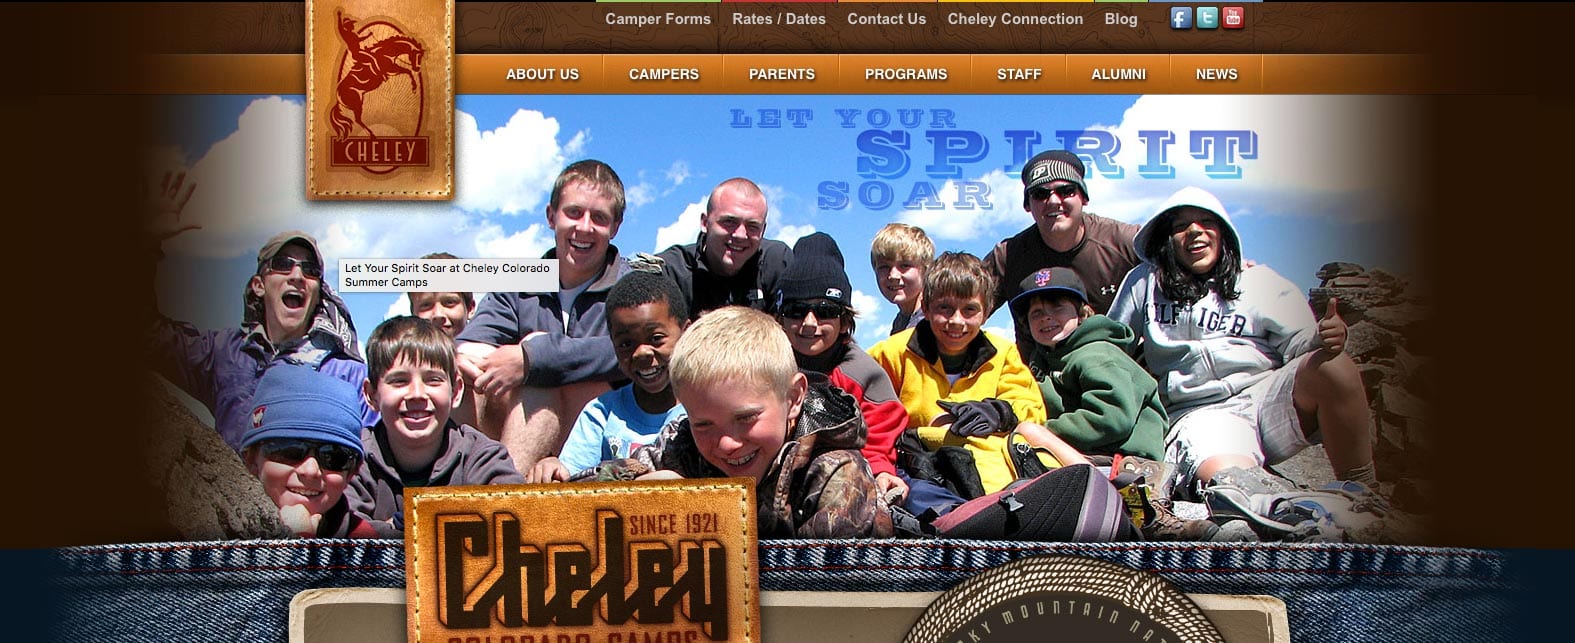 A screenshot of the Cheley Camps website header